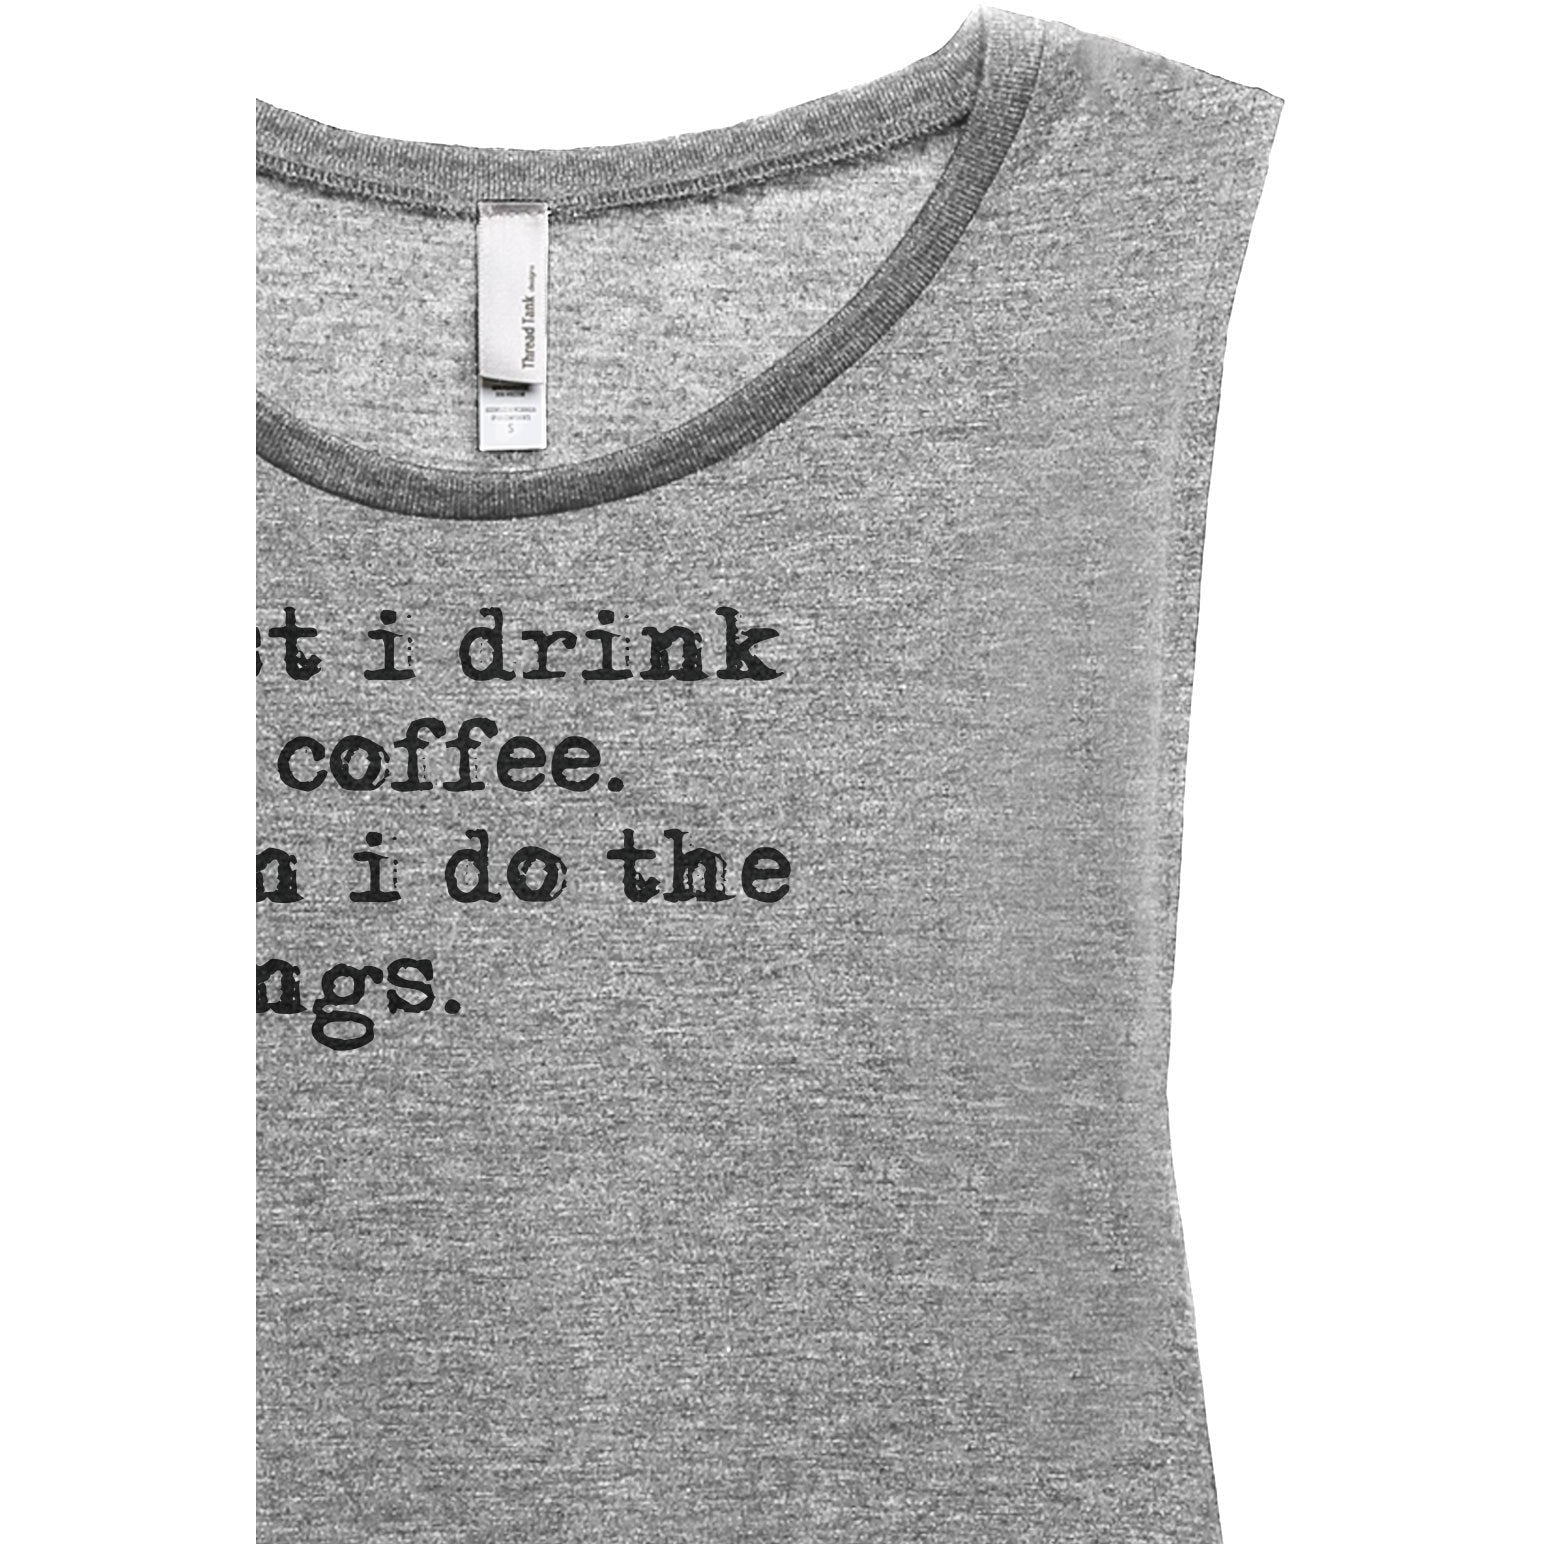 First I Drink The Coffee Then I Do The Things Women's Relaxed Muscle Tank Tee Heather Grey Closeup Details
